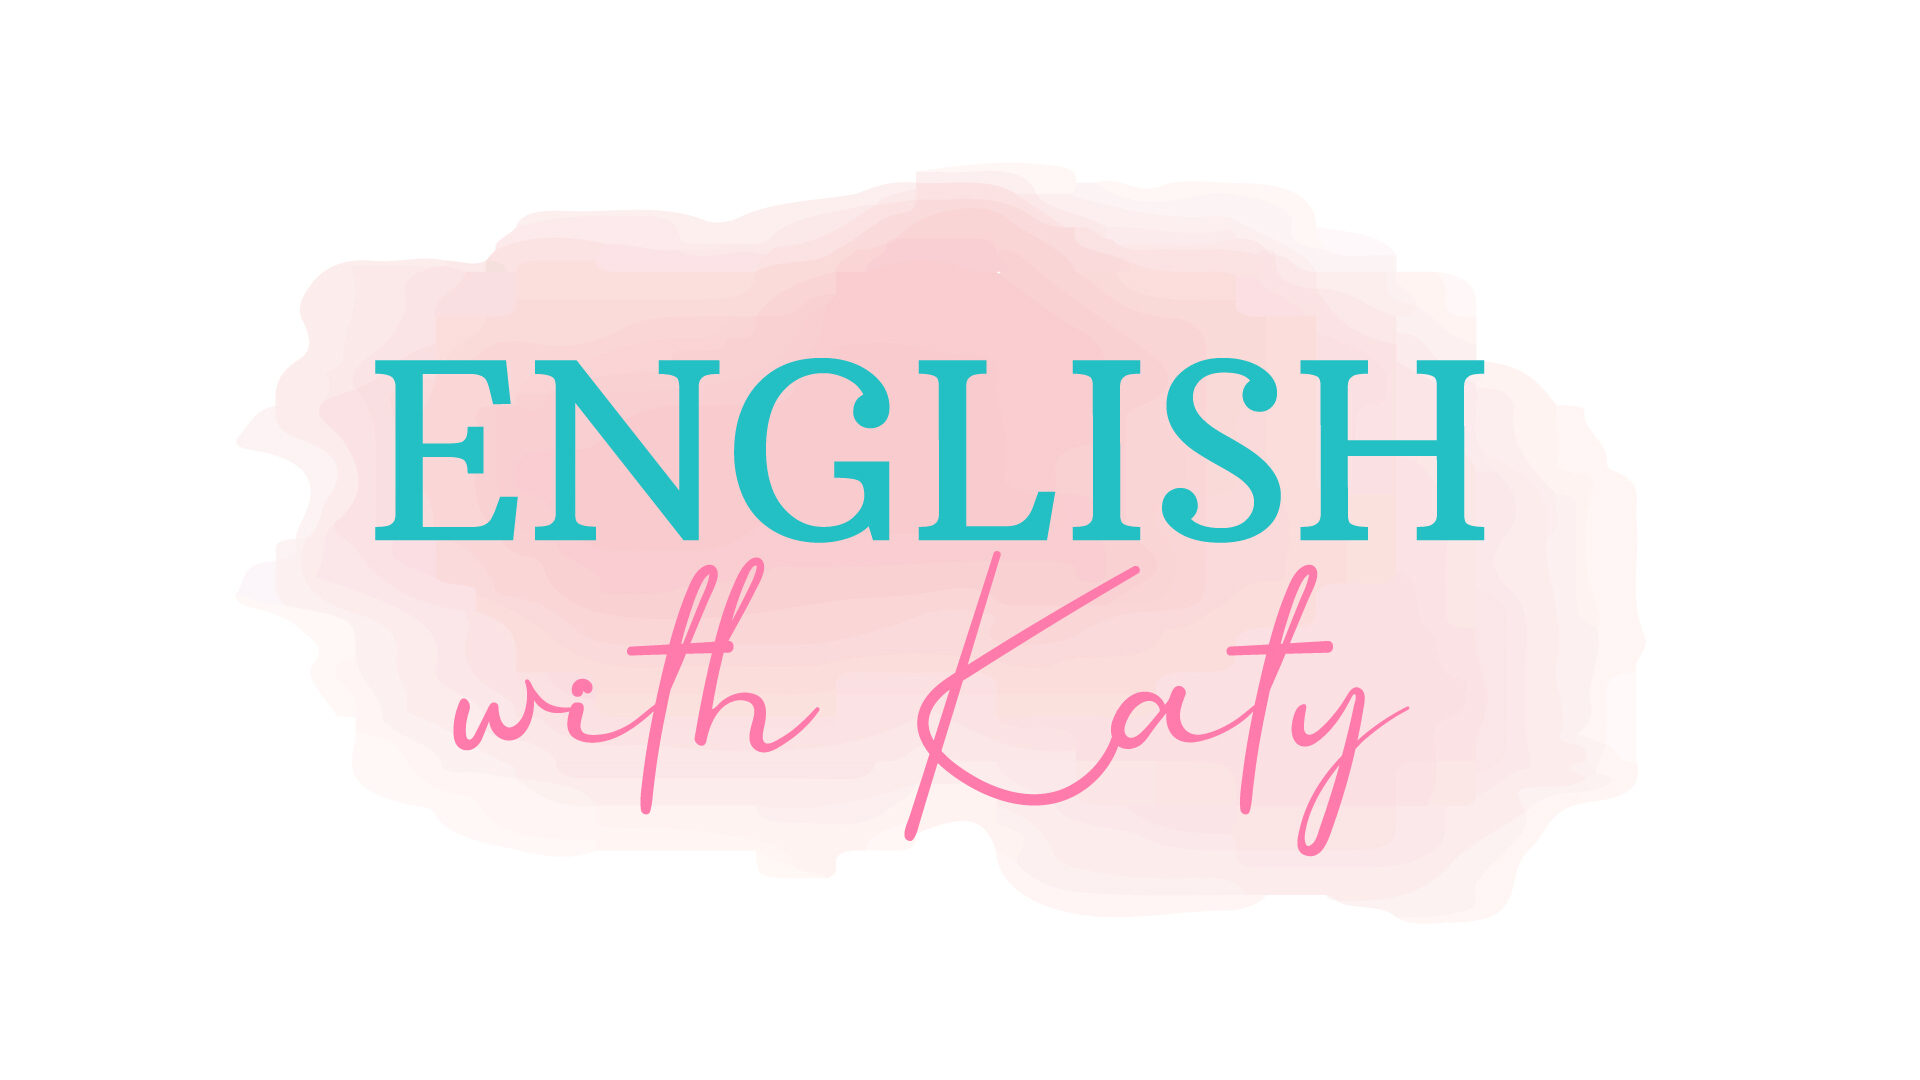 English with Katy - Another language Learning Academy in Elche